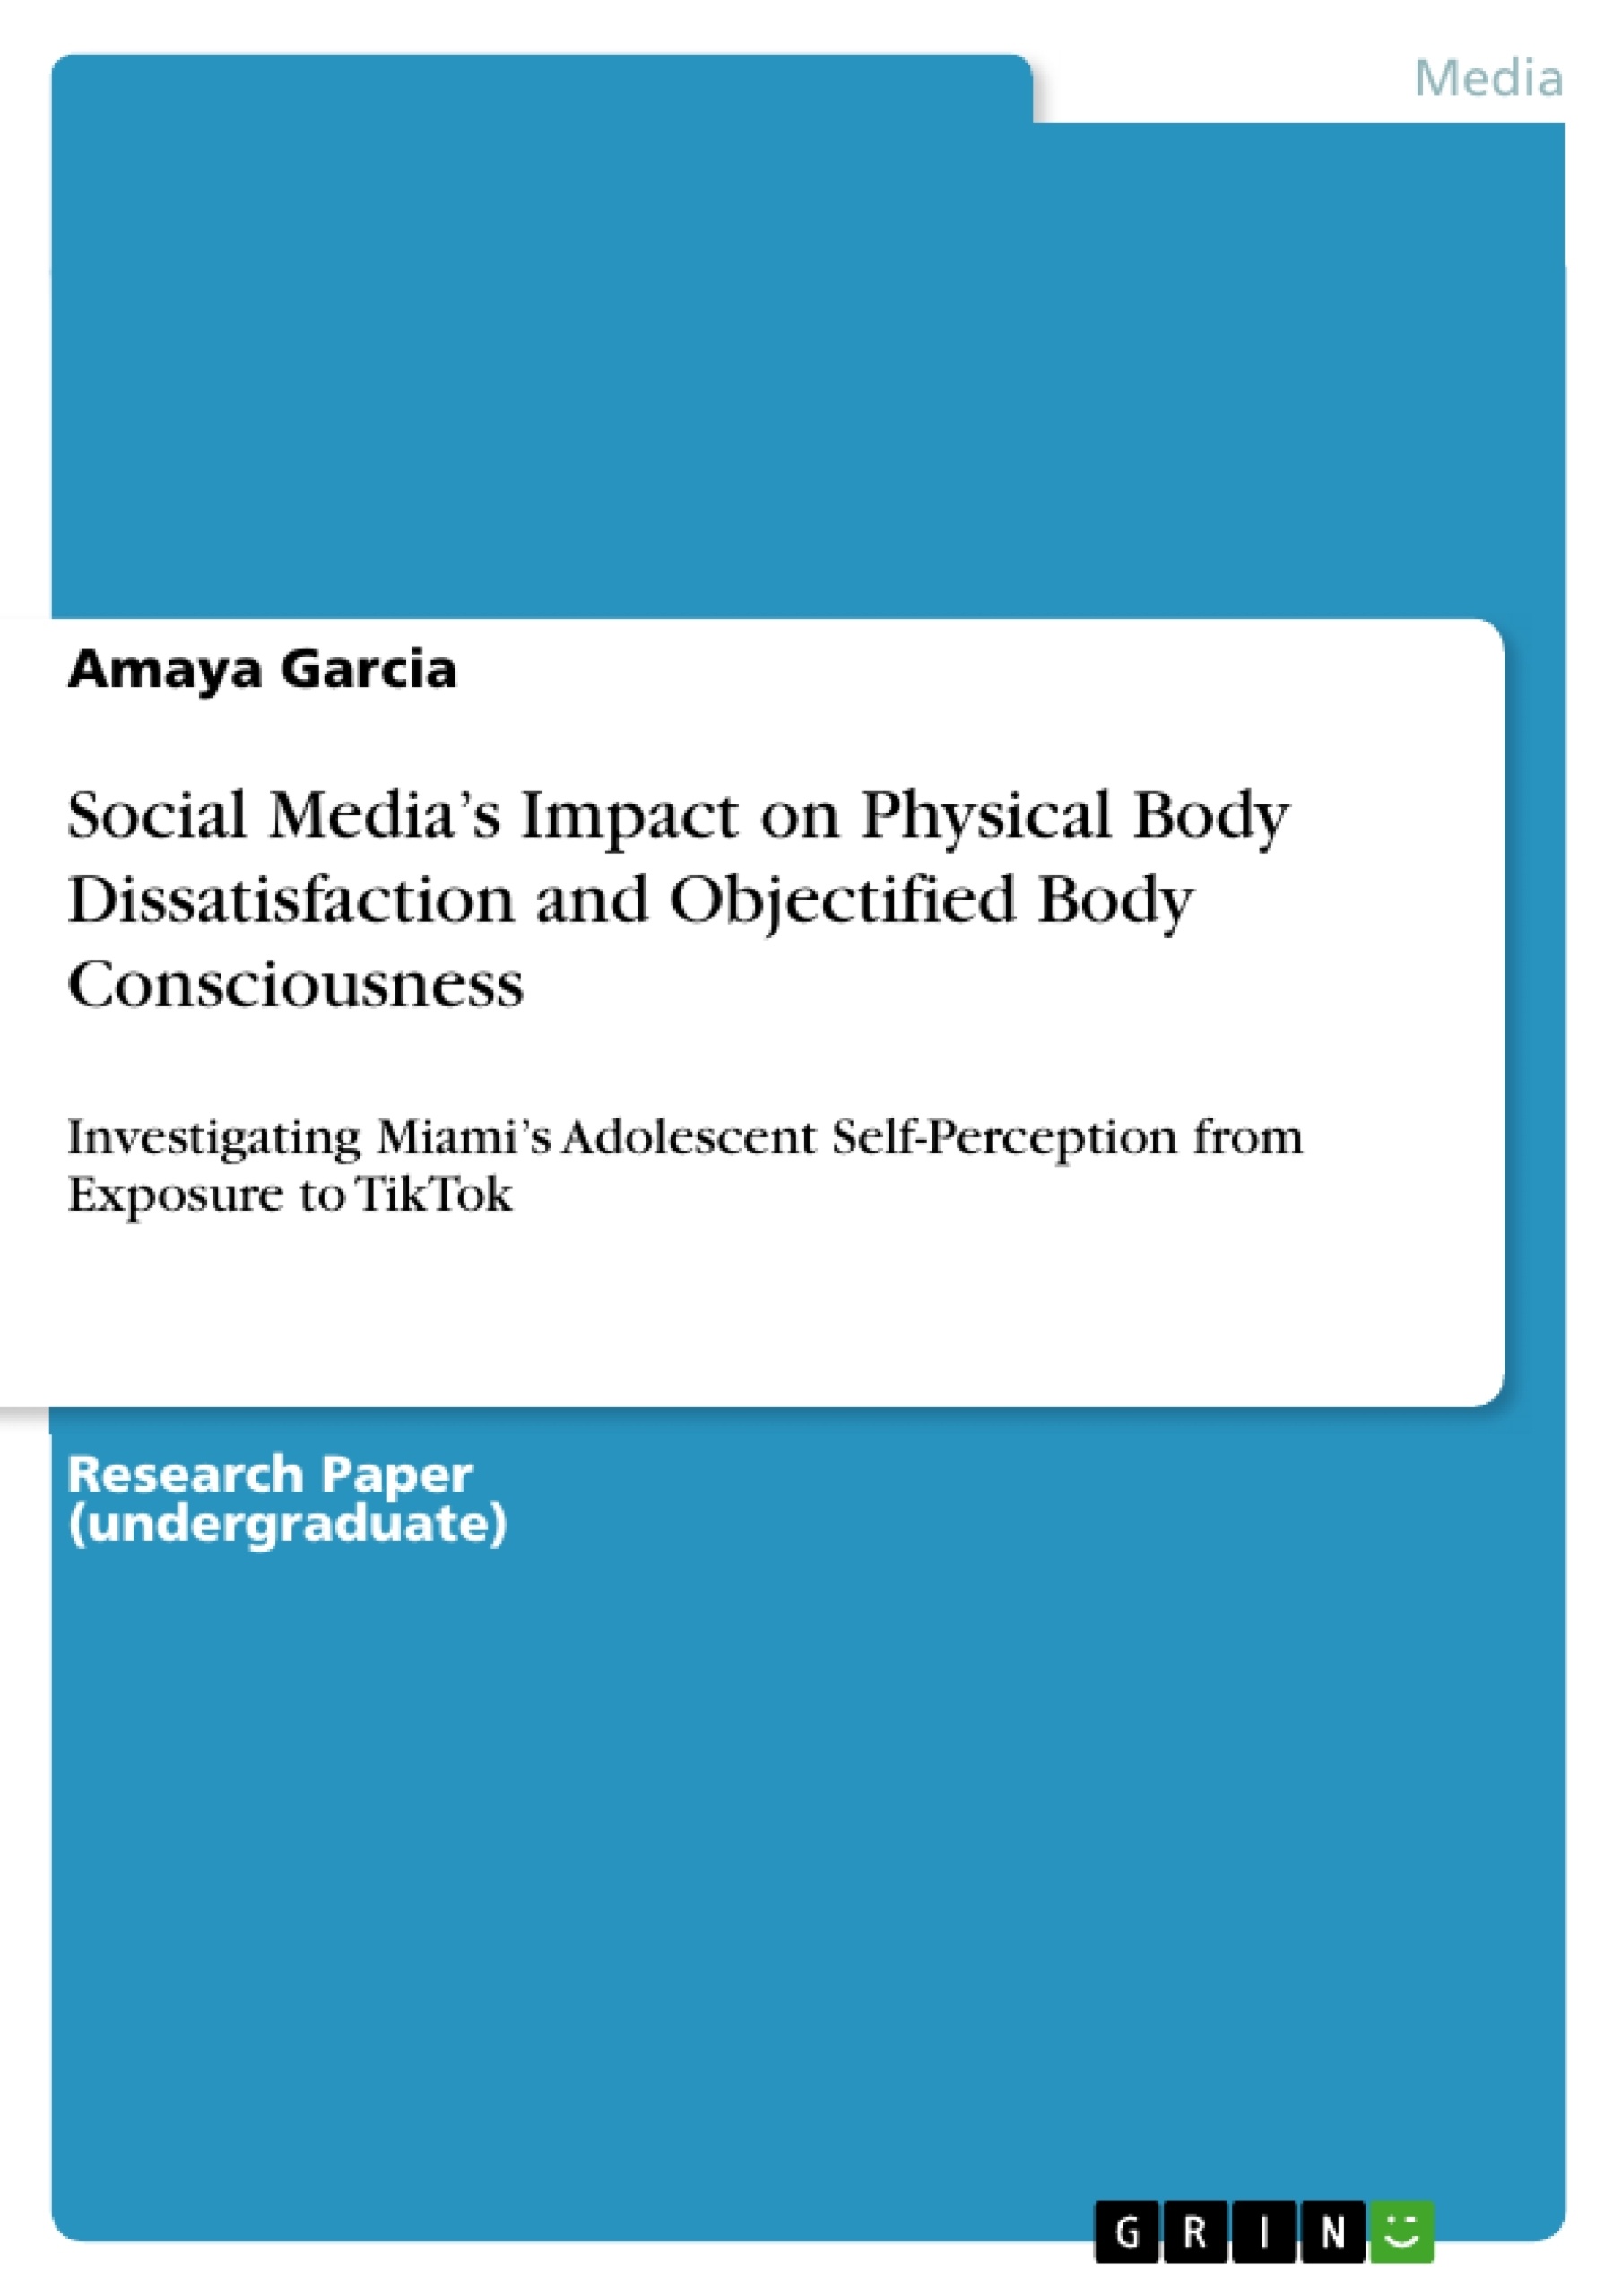 Title: Social Media’s Impact on Physical Body Dissatisfaction and Objectified Body Consciousness